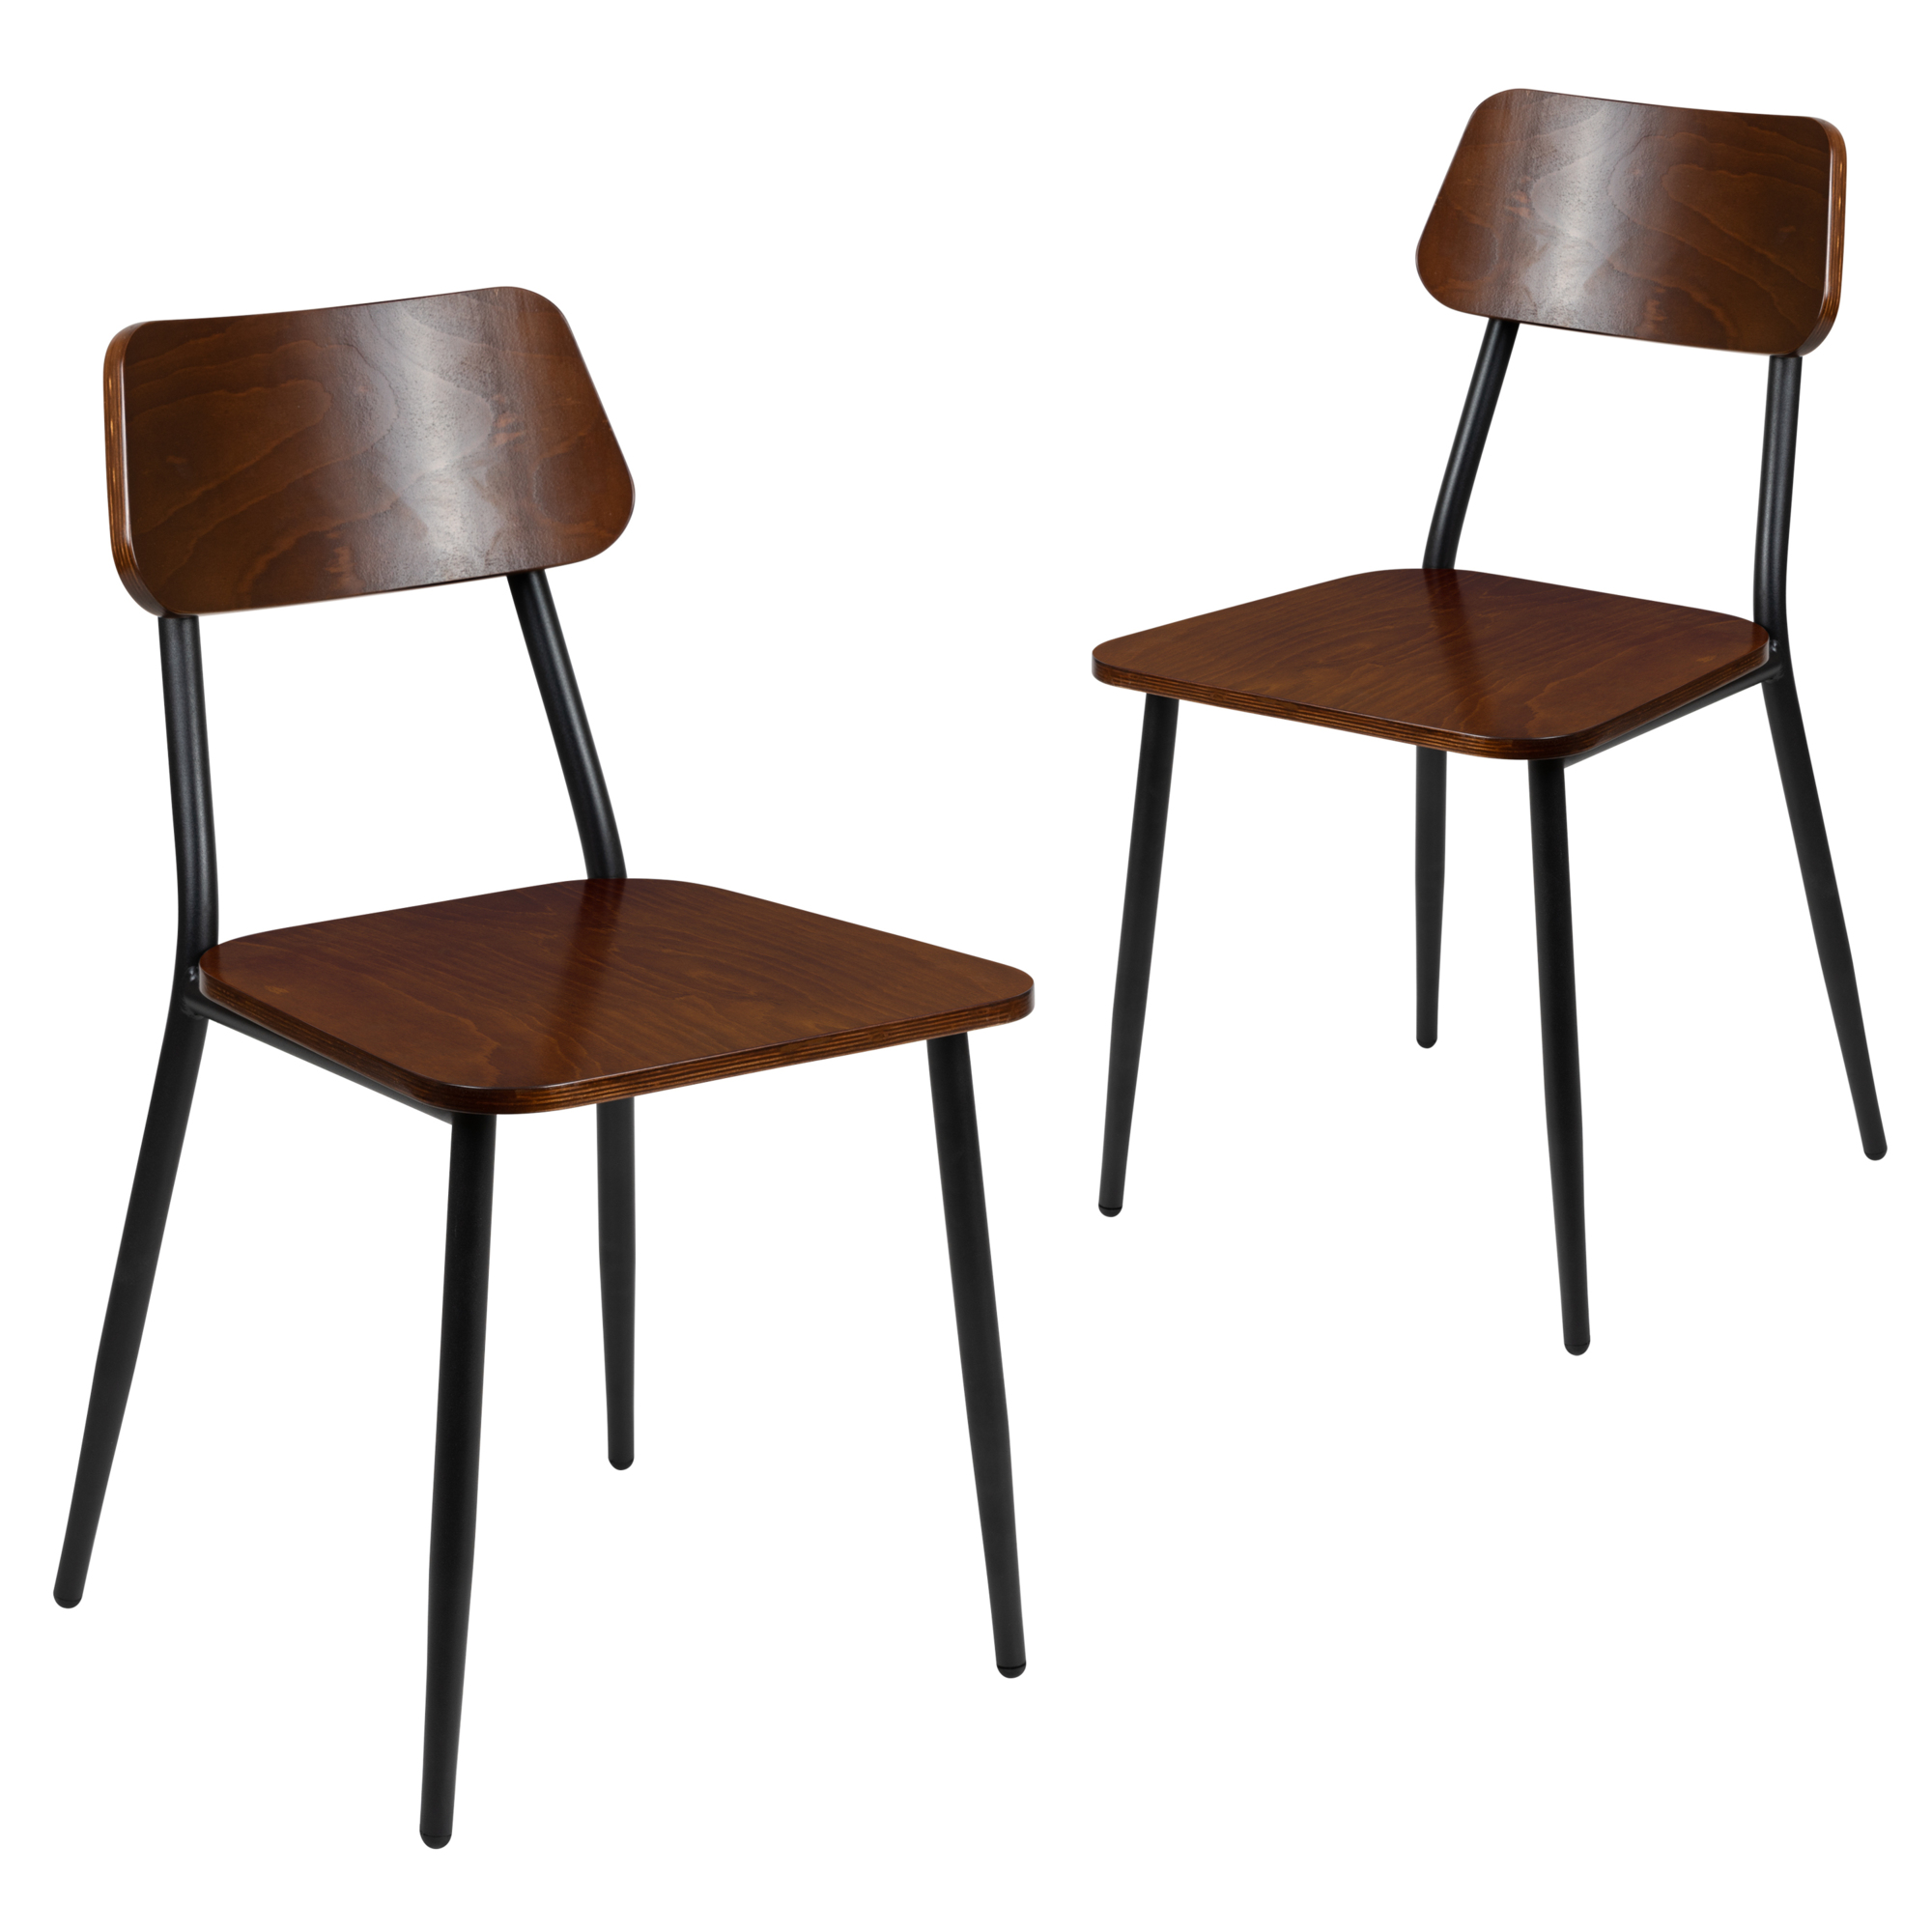 Flash Furniture, 2 PK Industrial Chair with Steel Frame - Wood Seat, Primary Color Brown, Included (qty.) 2, Model 2XUDG60725